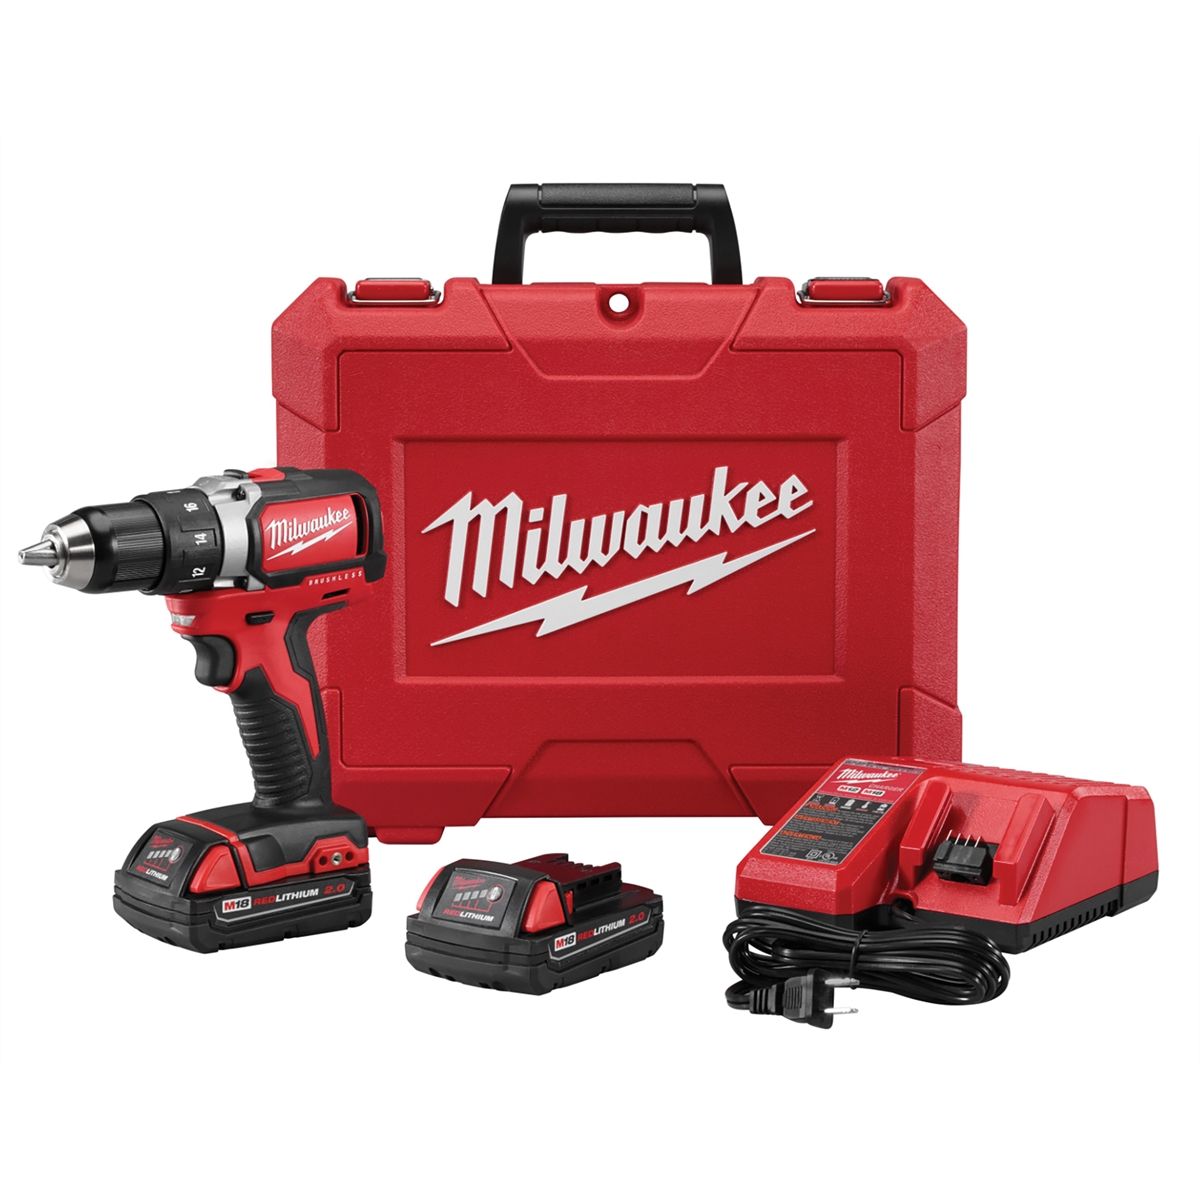 M18 1/2" Compact Brushless Drill/Driver Kit